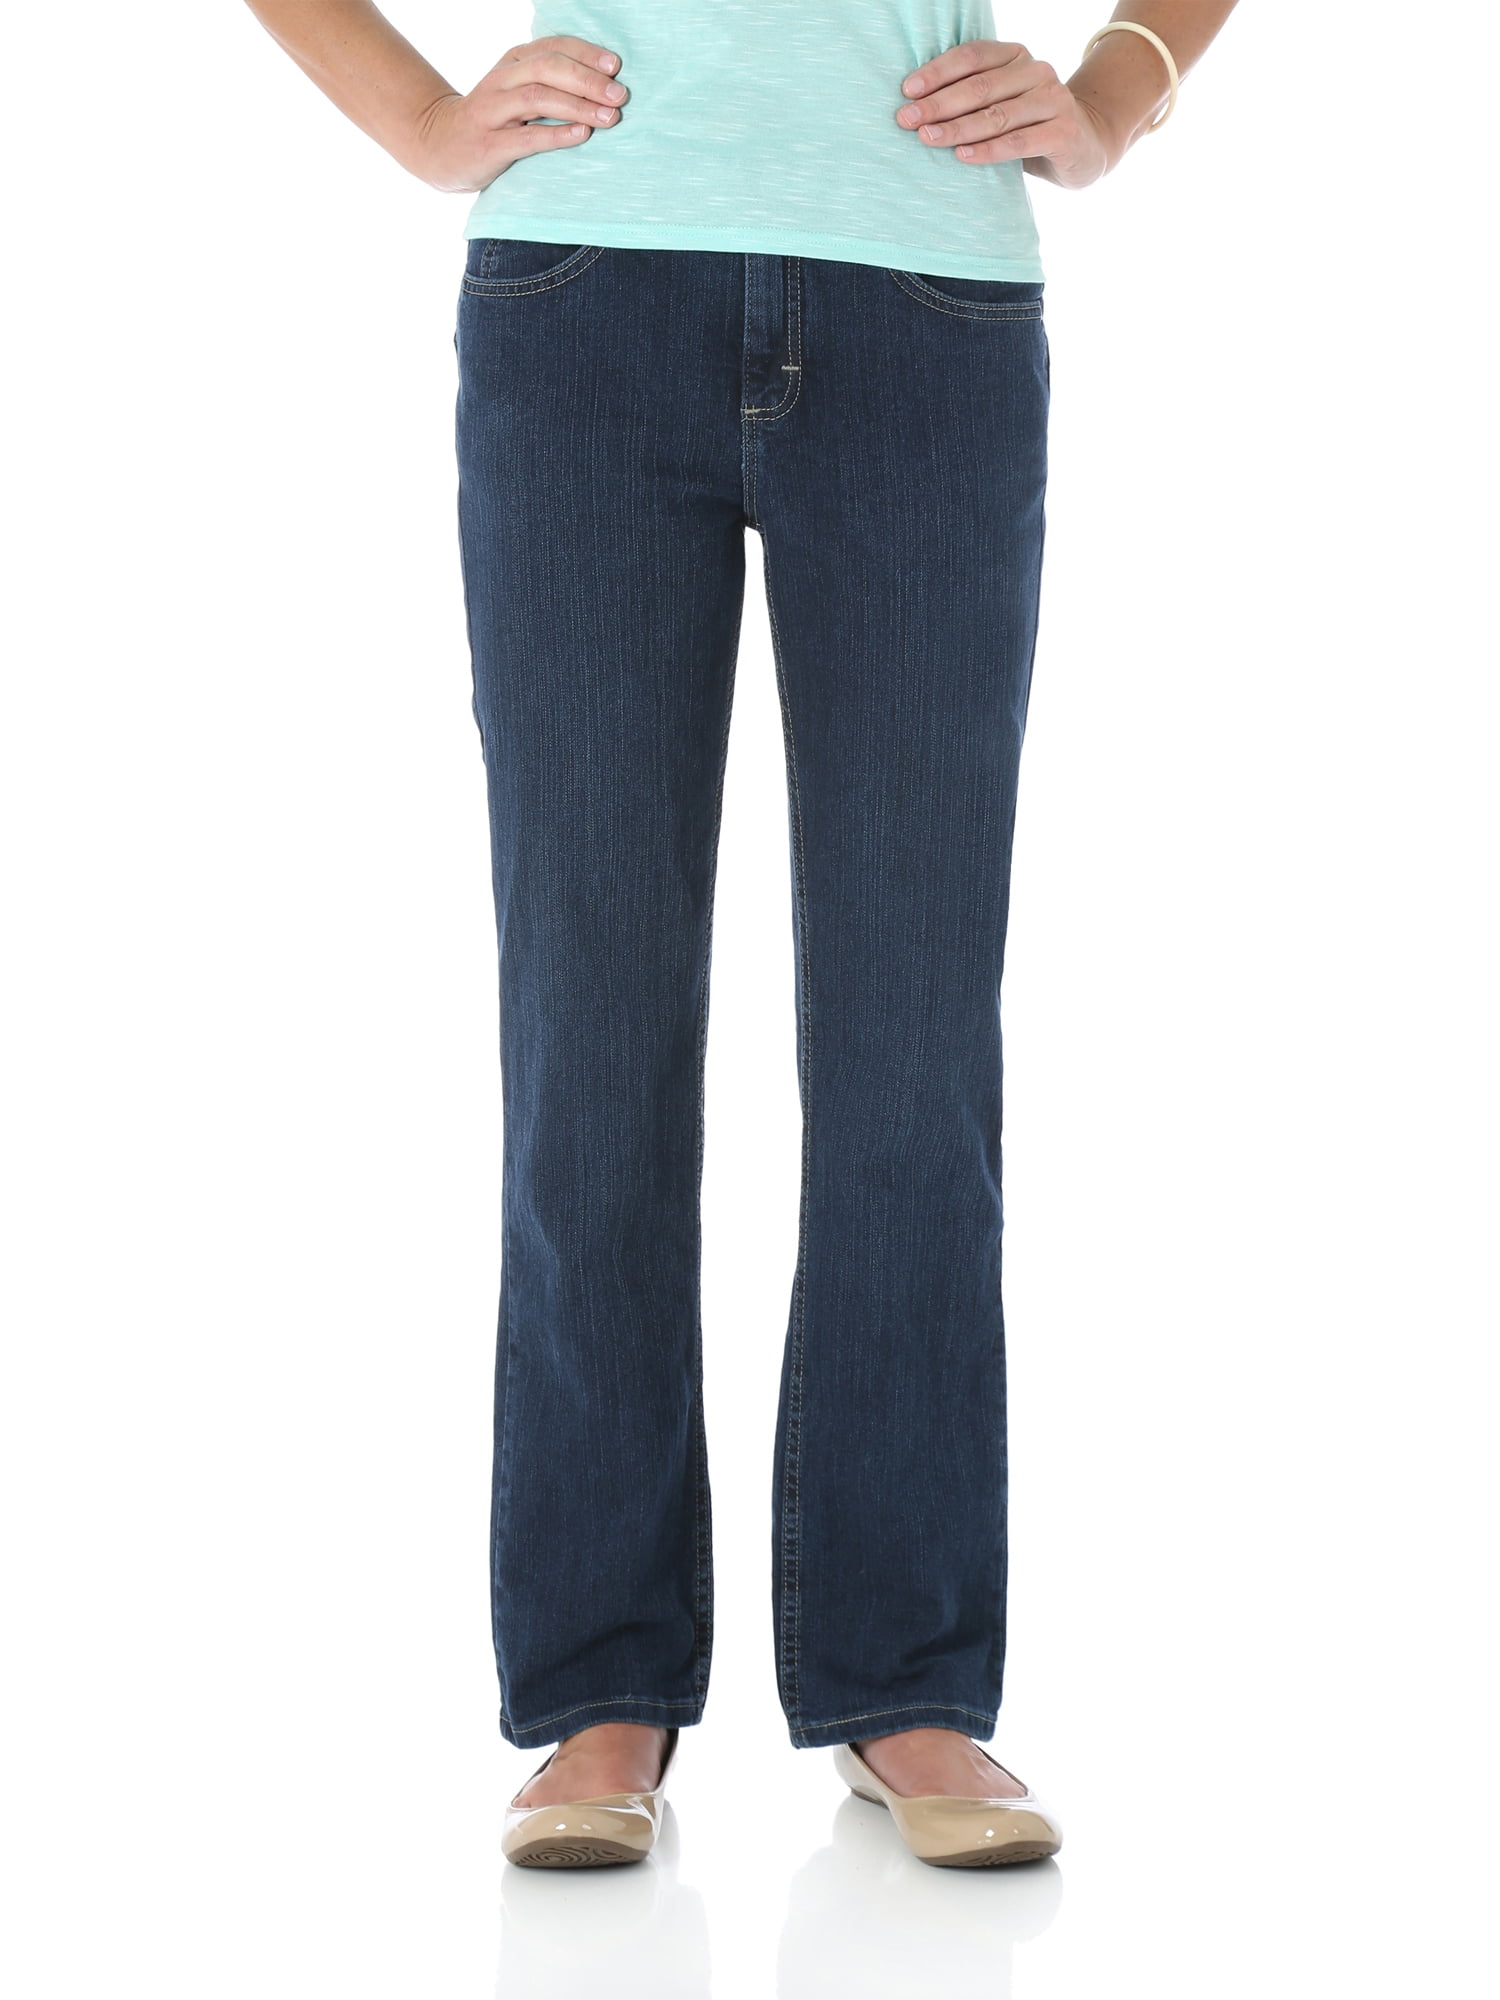 lee rider jeans classic fit straight leg